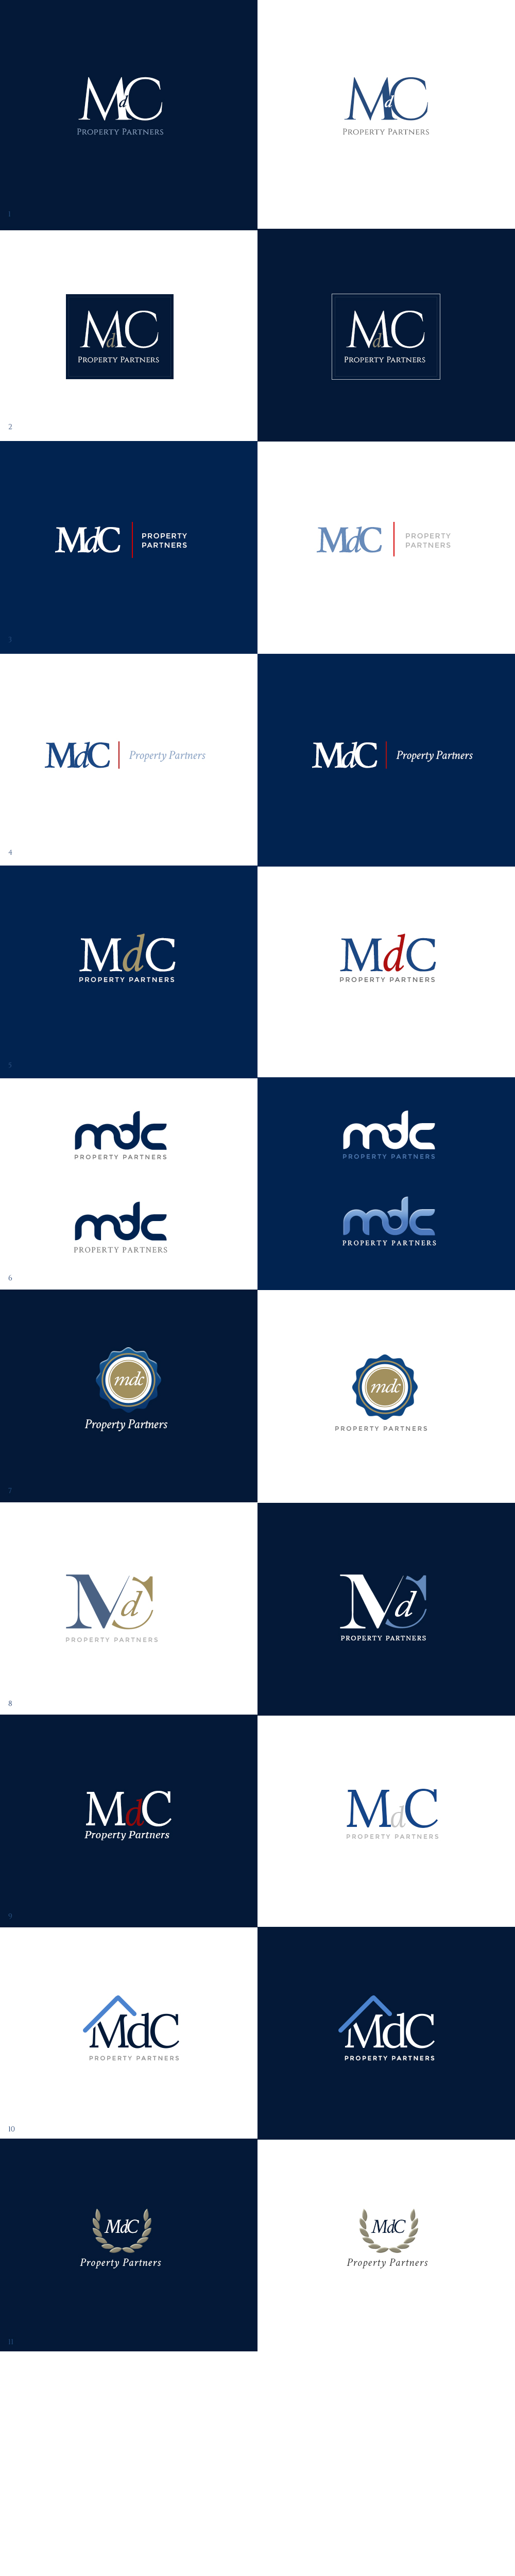 mdc_logos_initial_concepts